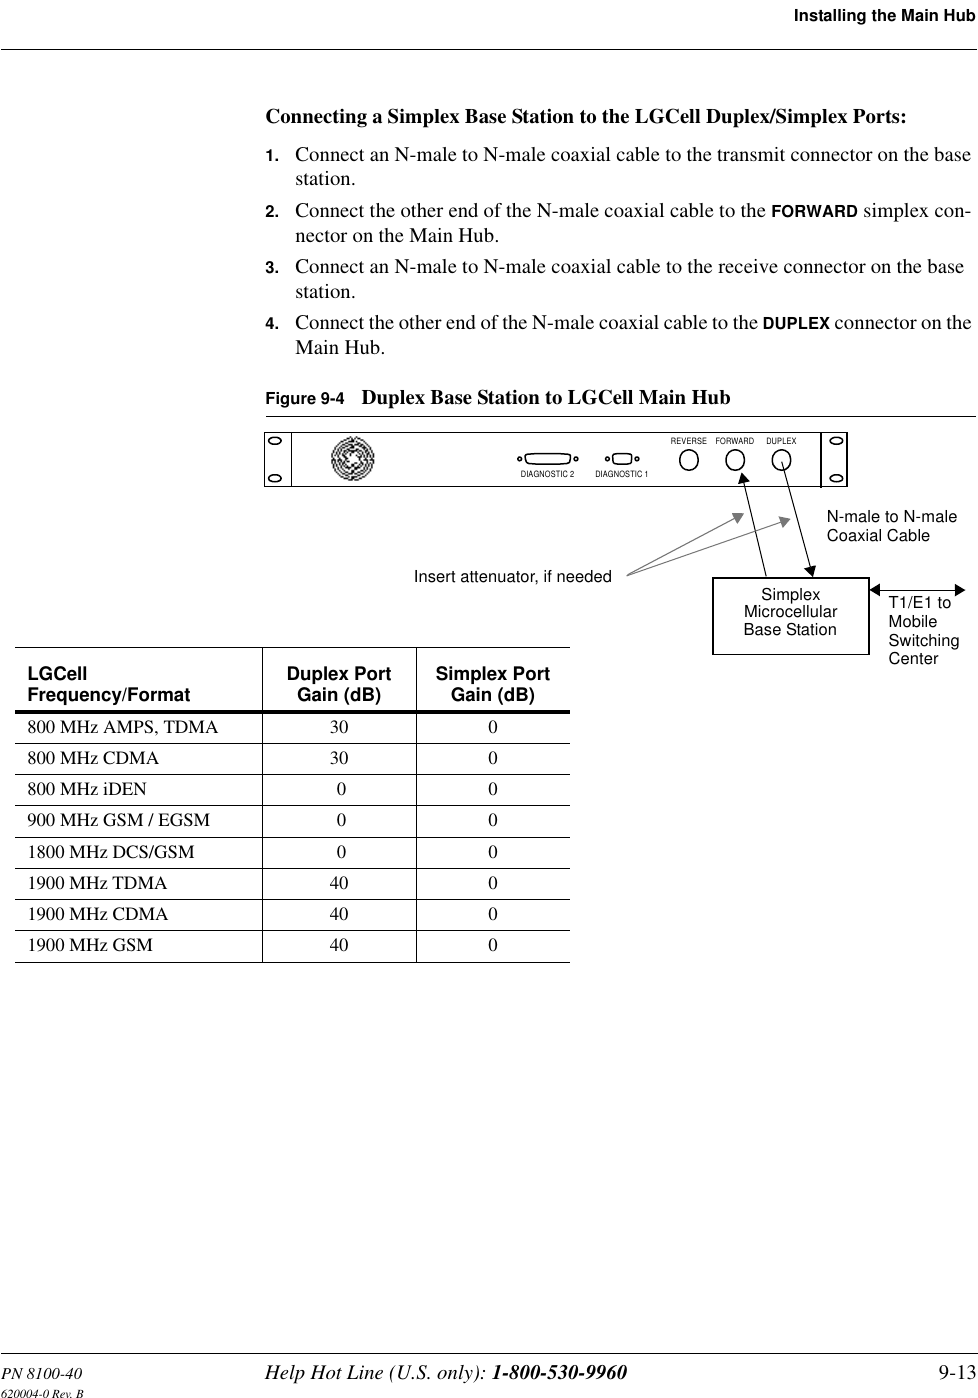 PN 8100-40 Help Hot Line (U.S. only): 1-800-530-9960 9-13620004-0 Rev. BInstalling the Main HubConnecting a Simplex Base Station to the LGCell Duplex/Simplex Ports:1. Connect an N-male to N-male coaxial cable to the transmit connector on the base station.2. Connect the other end of the N-male coaxial cable to the FORWARD simplex con-nector on the Main Hub.3. Connect an N-male to N-male coaxial cable to the receive connector on the base station.4. Connect the other end of the N-male coaxial cable to the DUPLEX connector on the Main Hub.Figure 9-4 Duplex Base Station to LGCell Main HubREVERSE FORWARD DUPLEXDIAGNOSTIC 2 DIAGNOSTIC 1MicrocellularN-male to N-maleCoaxial CableBase StationSimplex T1/E1 toMobileSwitchingCenterInsert attenuator, if neededLGCell Frequency/Format Duplex PortGain (dB) Simplex PortGain (dB)800 MHz AMPS, TDMA 30 0800 MHz CDMA 30 0800 MHz iDEN 0 0900 MHz GSM / EGSM 0 01800 MHz DCS/GSM 0 01900 MHz TDMA 40 01900 MHz CDMA 40 01900 MHz GSM 40 0